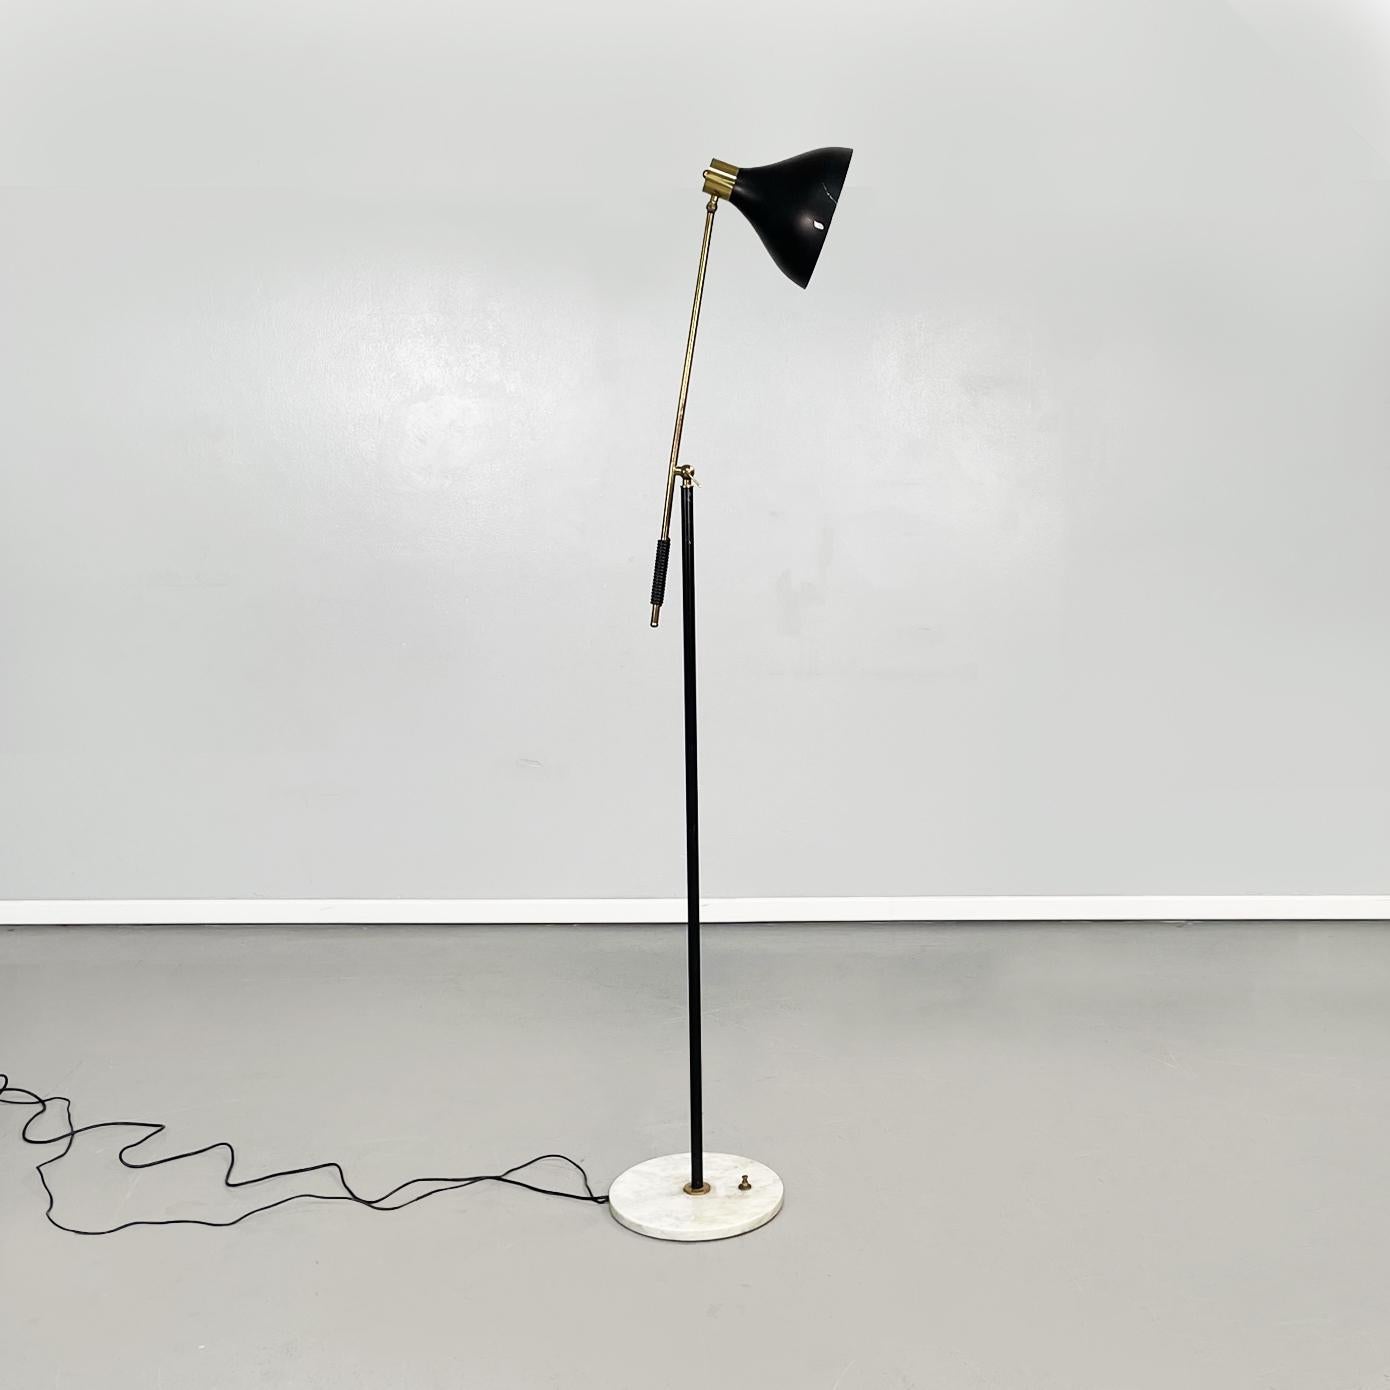 Italian Mid-Century Modern Adjustable brass metal floor lamp by Stilux, 1950s
Adjustable floor lamp with round marble base and structure in tubular of brass and metal. The lampshade is in black painted metal. The structure is composed with a brass